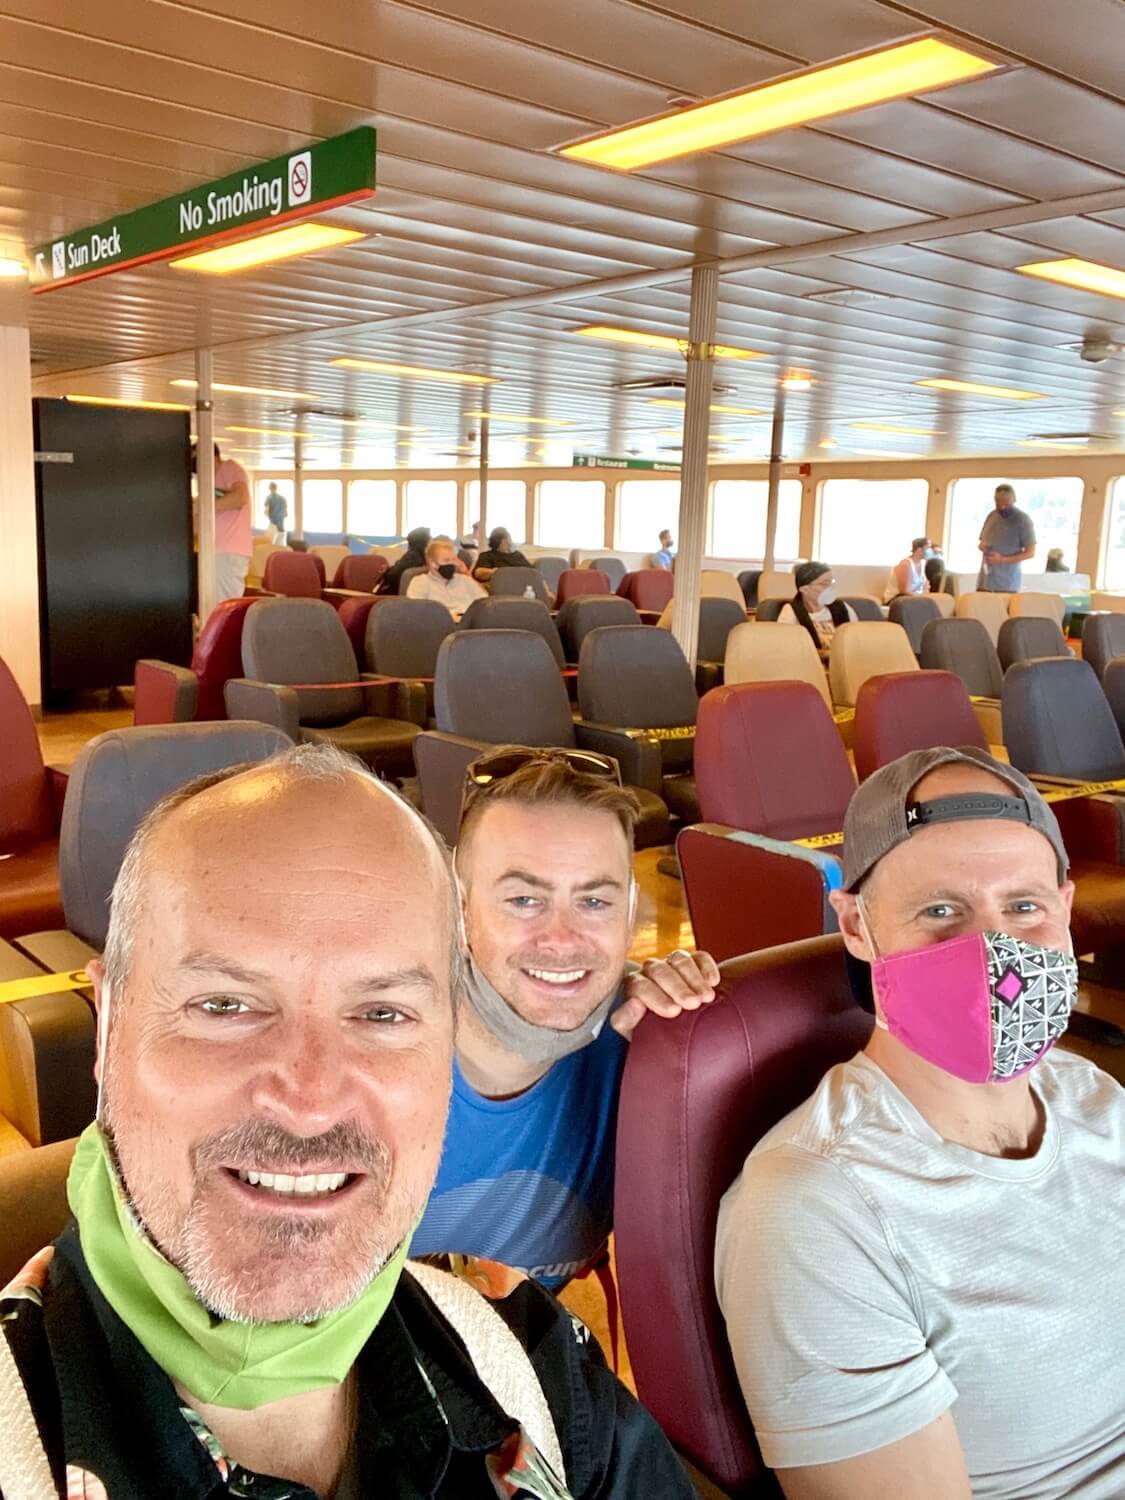 Passengers on the Washington State ferry are navigating their way to a fun destination. There are three men smiling for the camera including Matthew Kessi. The shot is taken indoors on the passenger deck of the ferry and there are hundreds of empty seats behind the men, colored red white and blues.